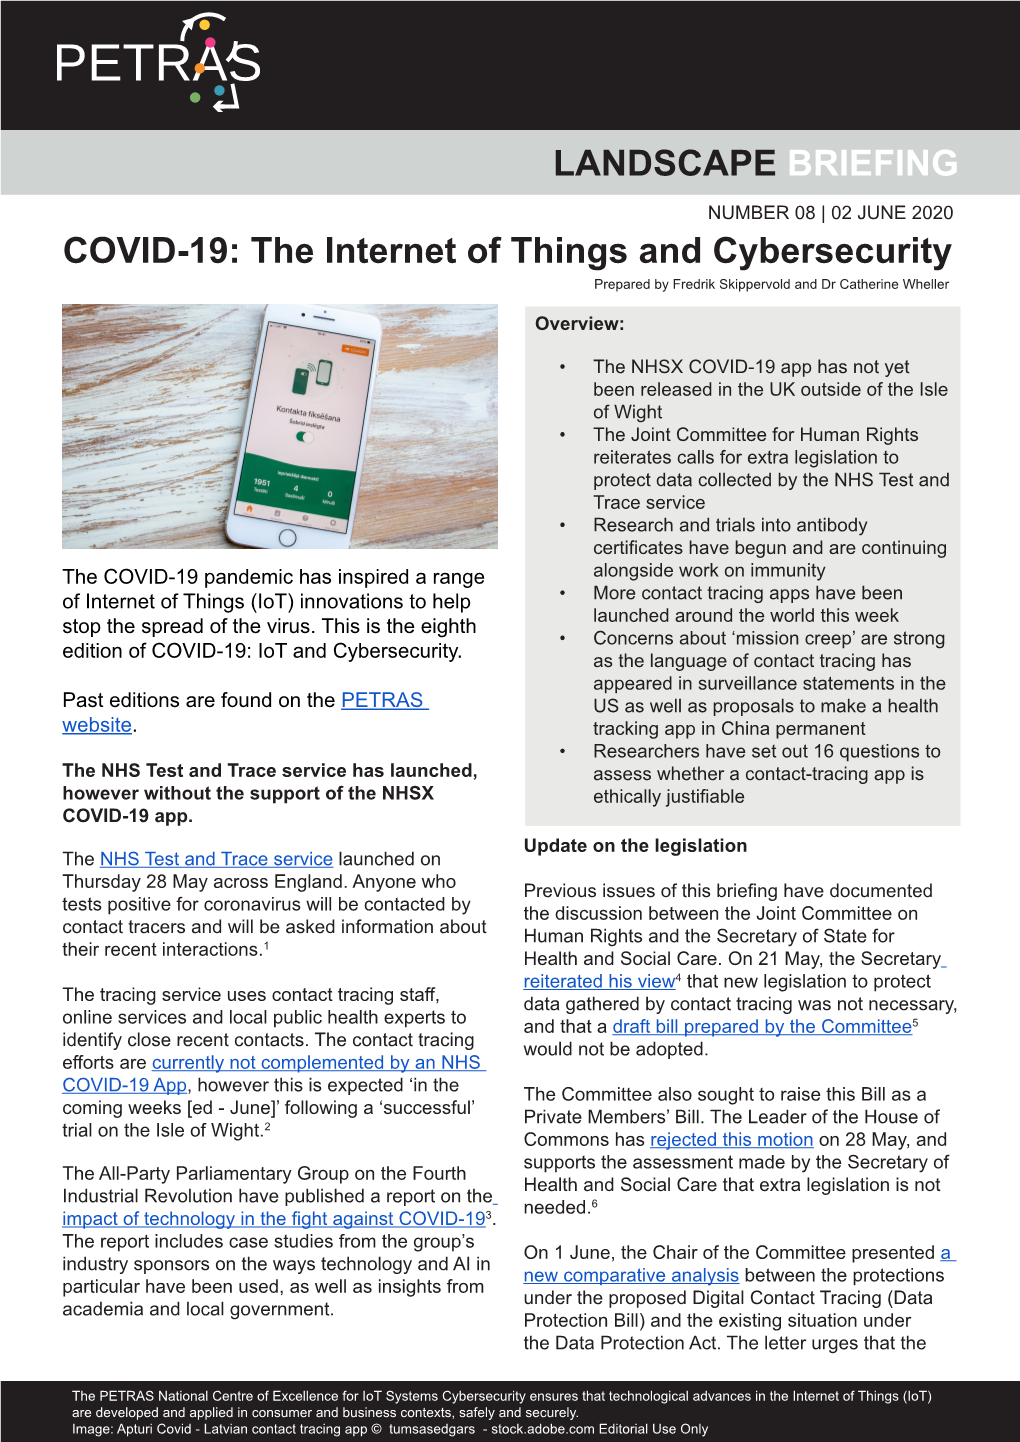 LANDSCAPE BRIEFING COVID-19: the Internet of Things and Cybersecurity